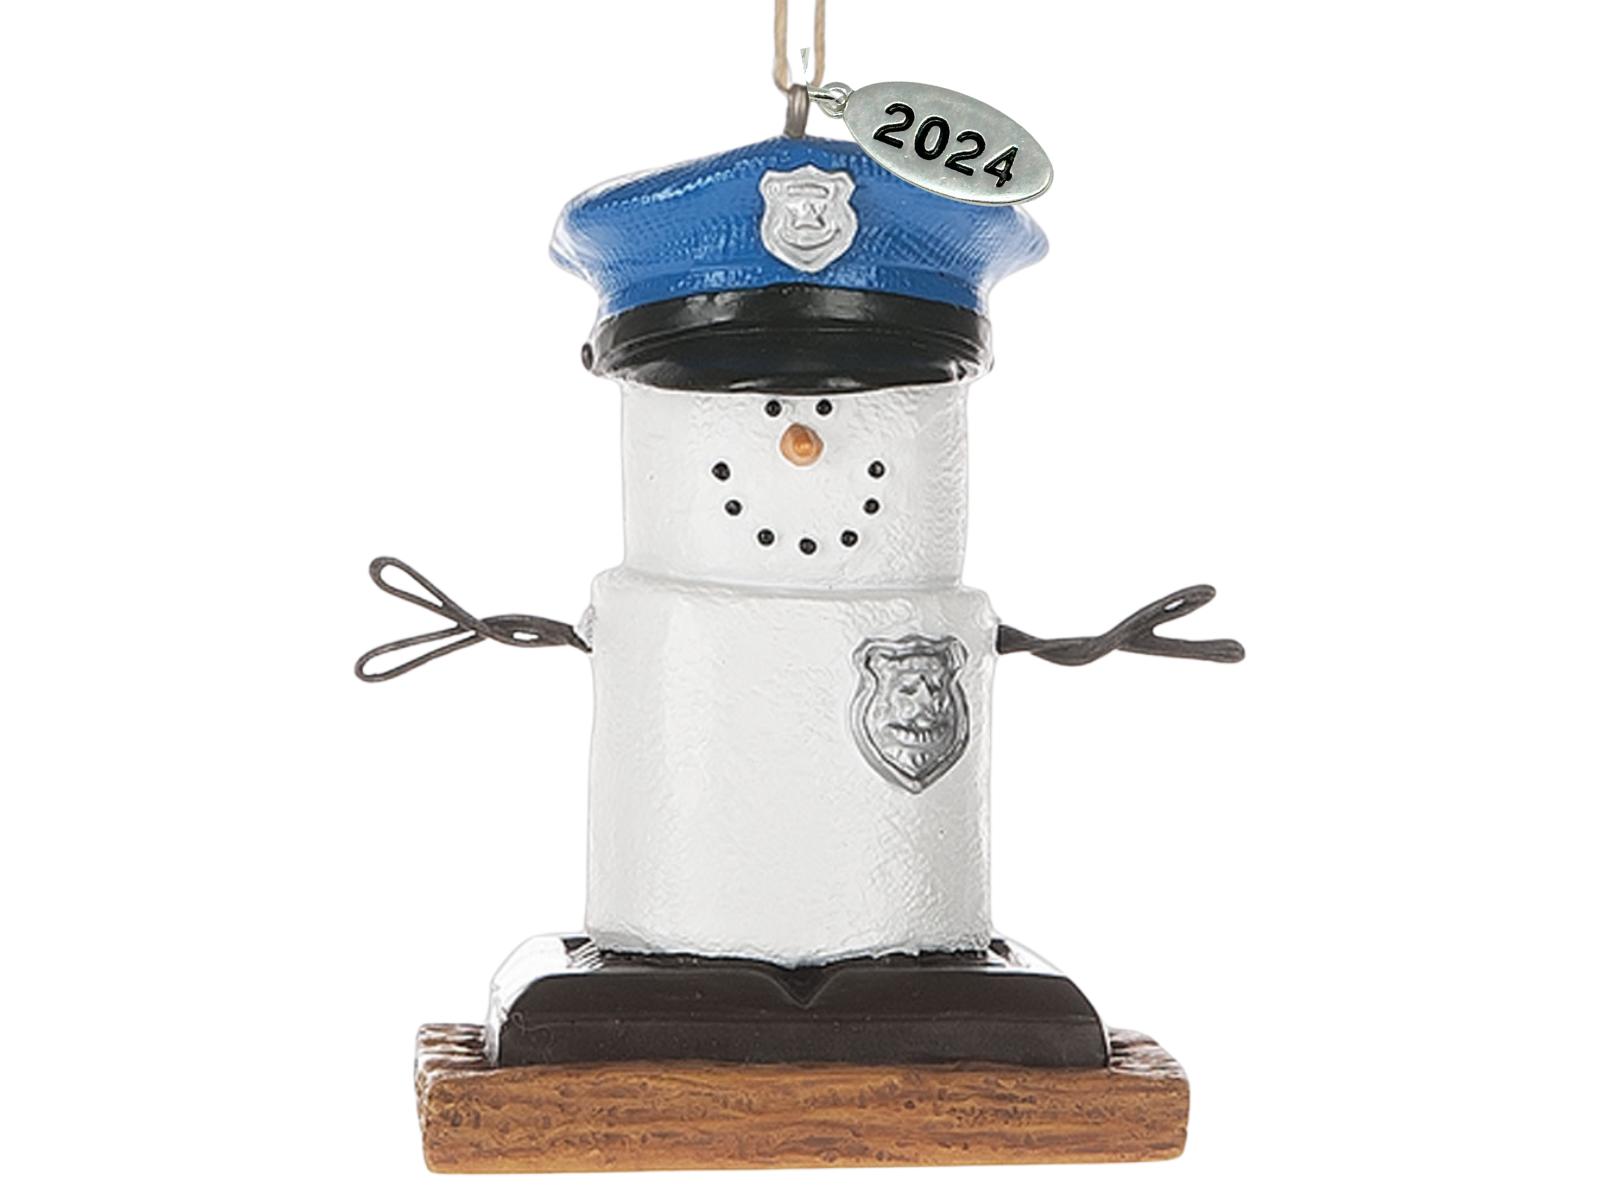 Smores Ornament 2024 - Police Officer Gifts, Police Christmas Ornaments - Cute Police Academy Graduation Gift - Comes in Gift Box So It's Ready for Giving